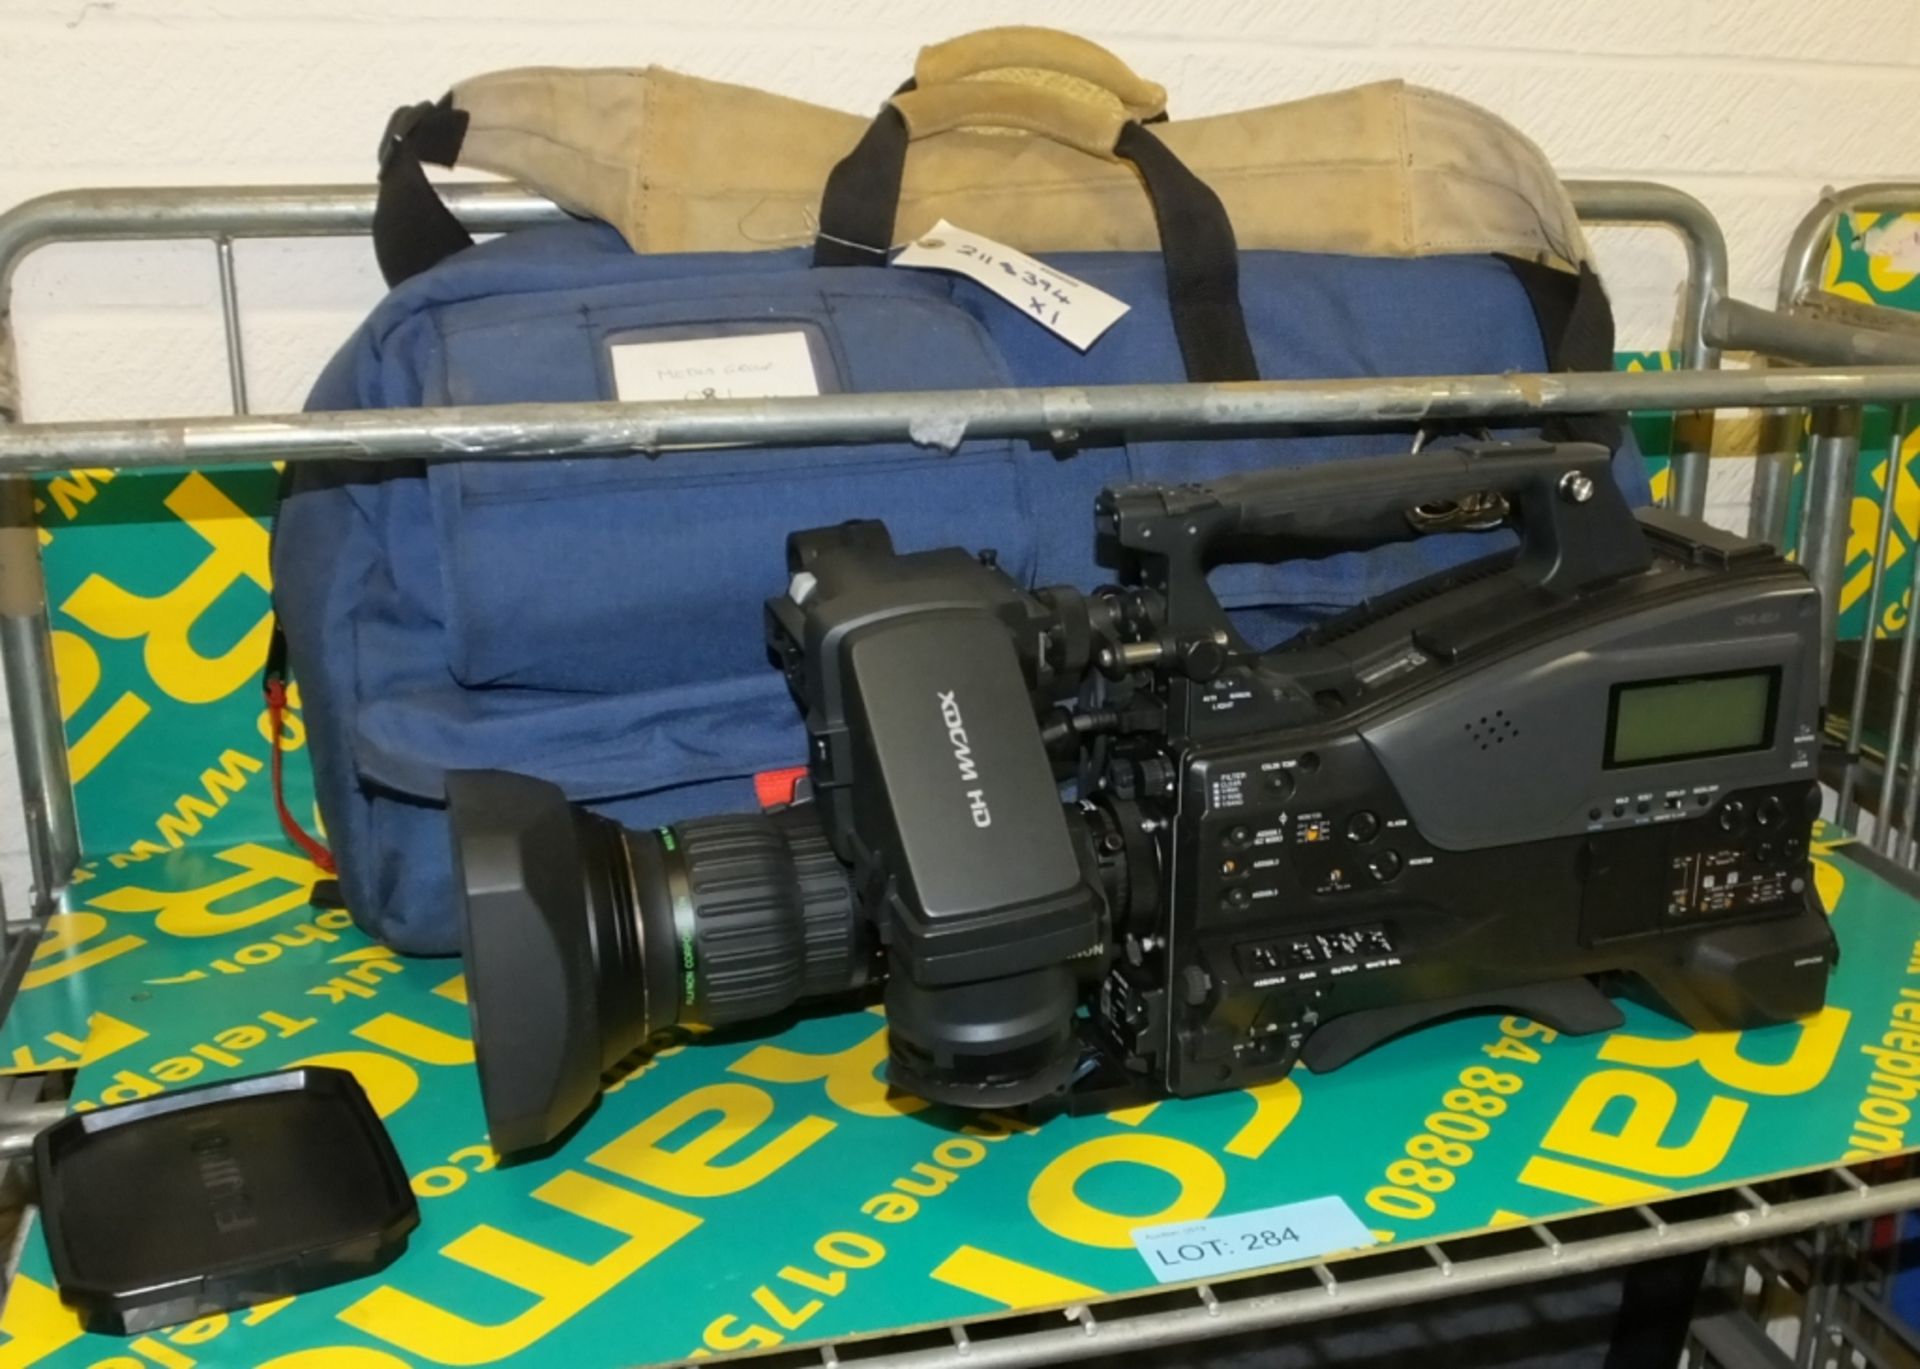 Sony PMW-350 Professional Camcorder with carry bag - no other accessories